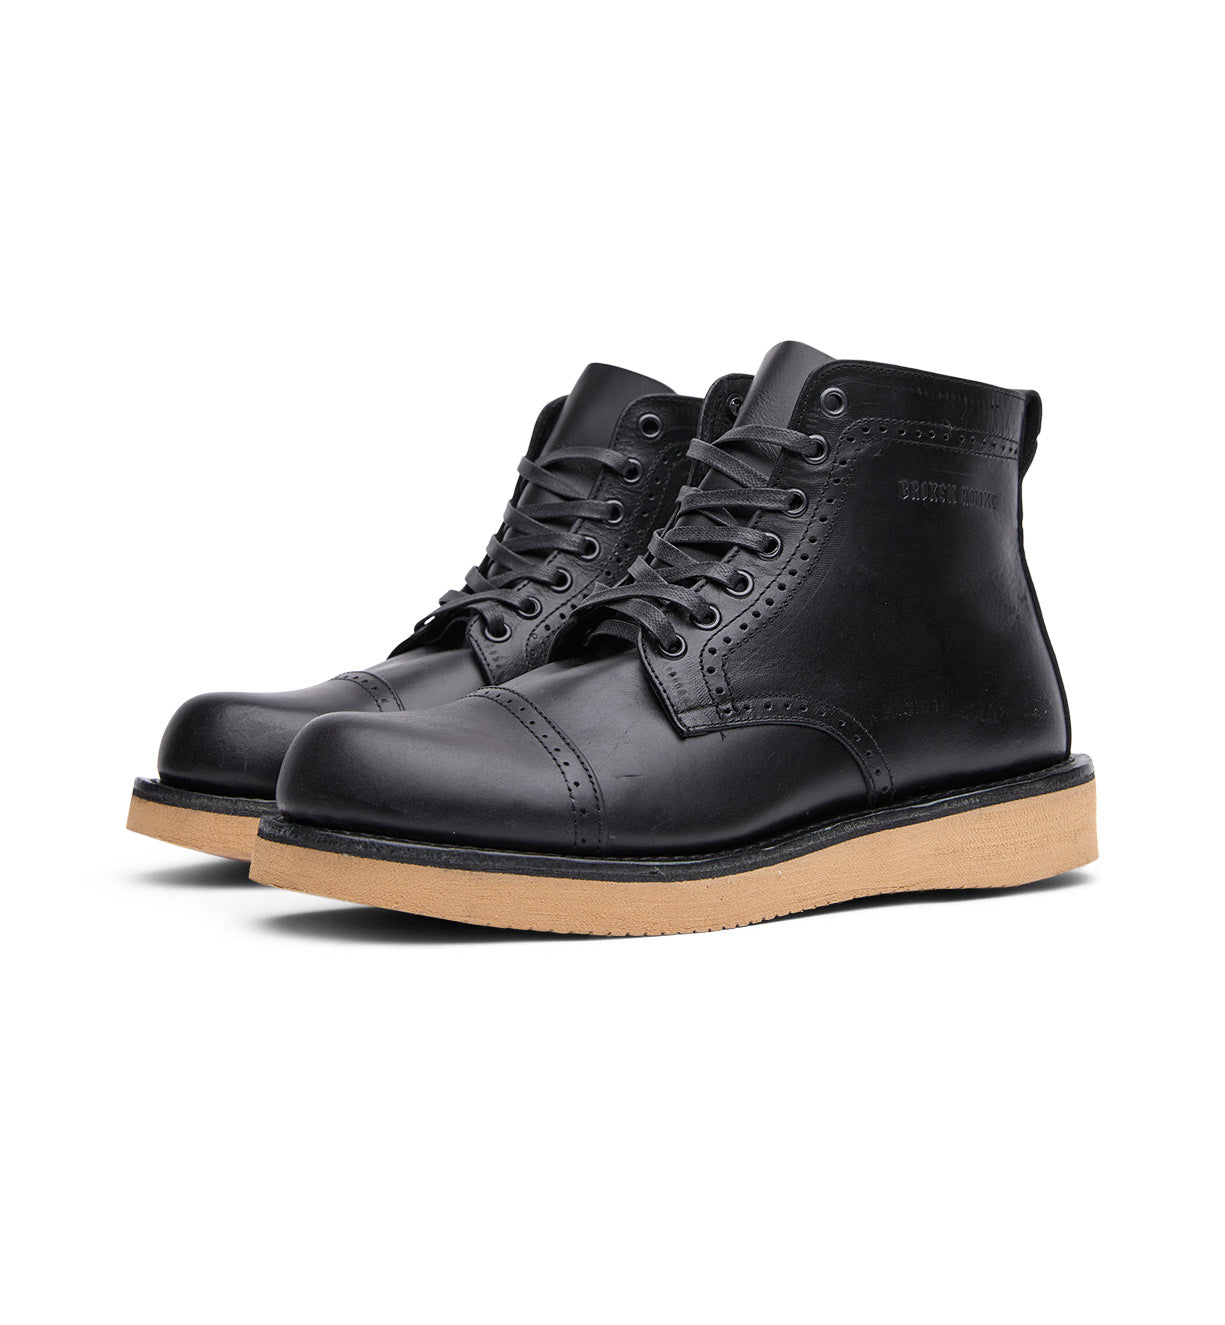 The Broken Homme Shaun boots feature a sleek black leather upper and are designed with a gum sole for excellent traction.